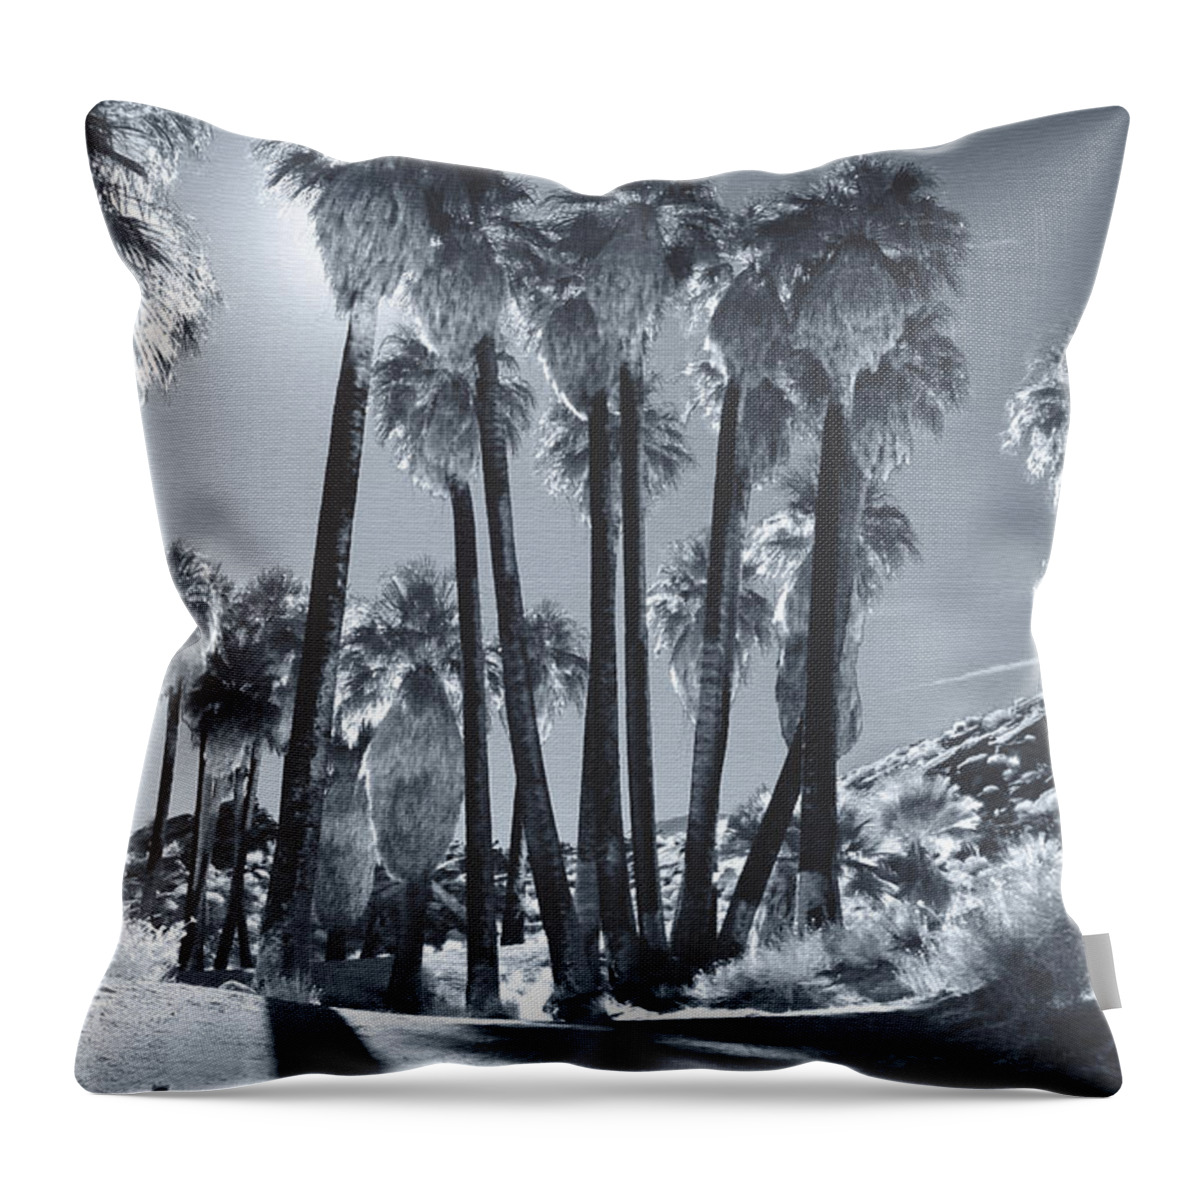 Indian Canyons Throw Pillow featuring the photograph Illuminate by Laurie Search